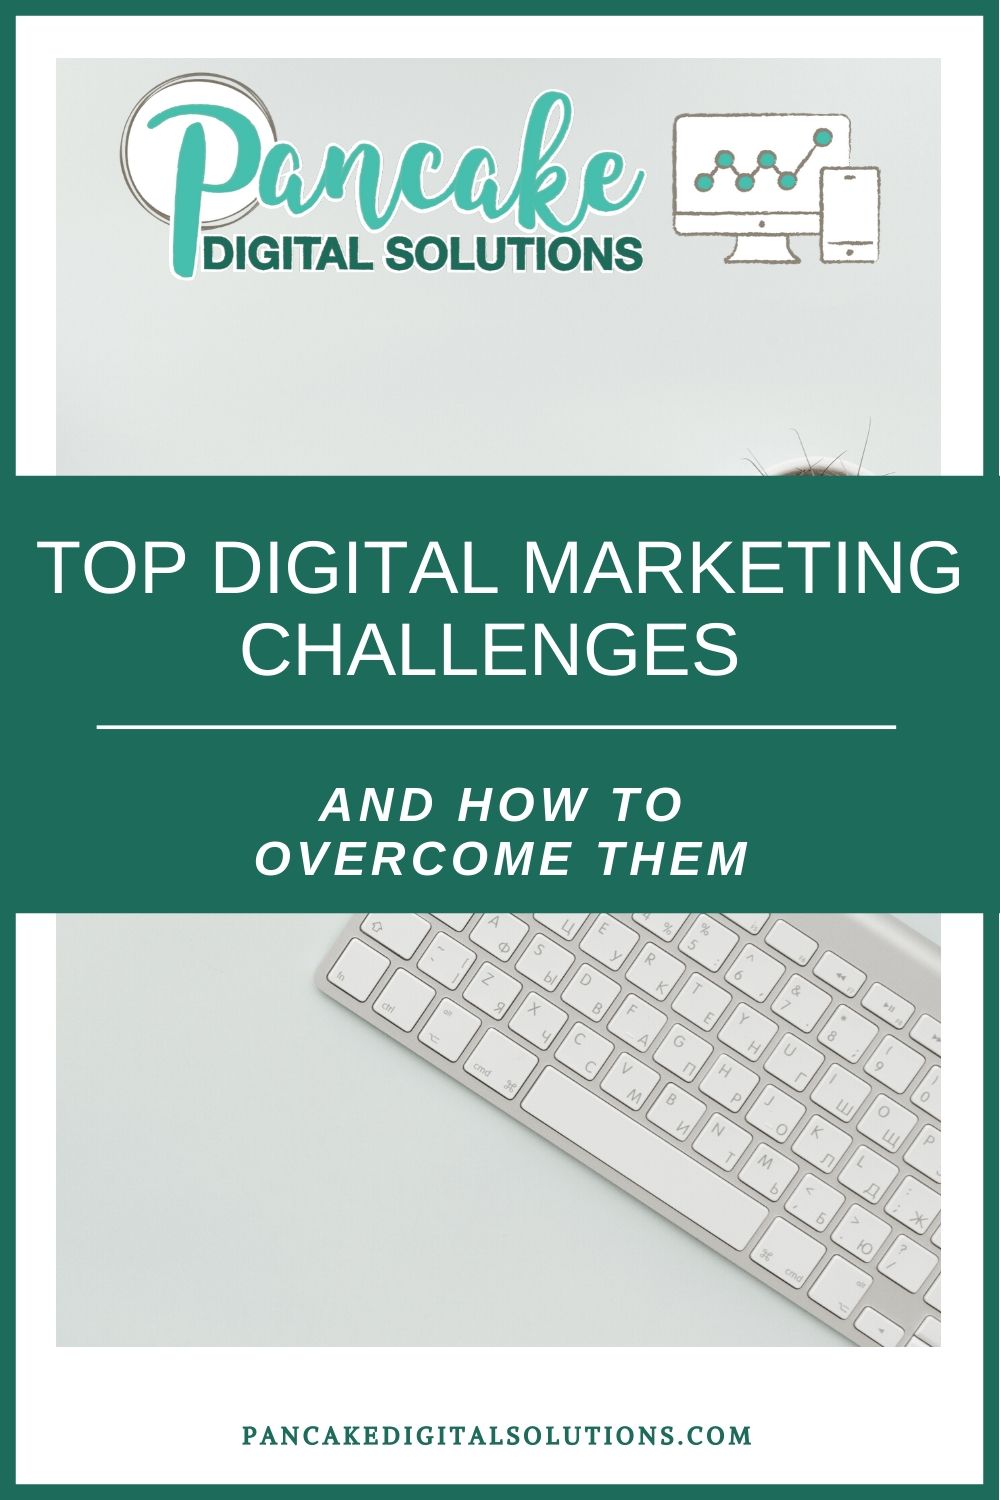 Top Digital Marketing Challenges and How to Overcome Them